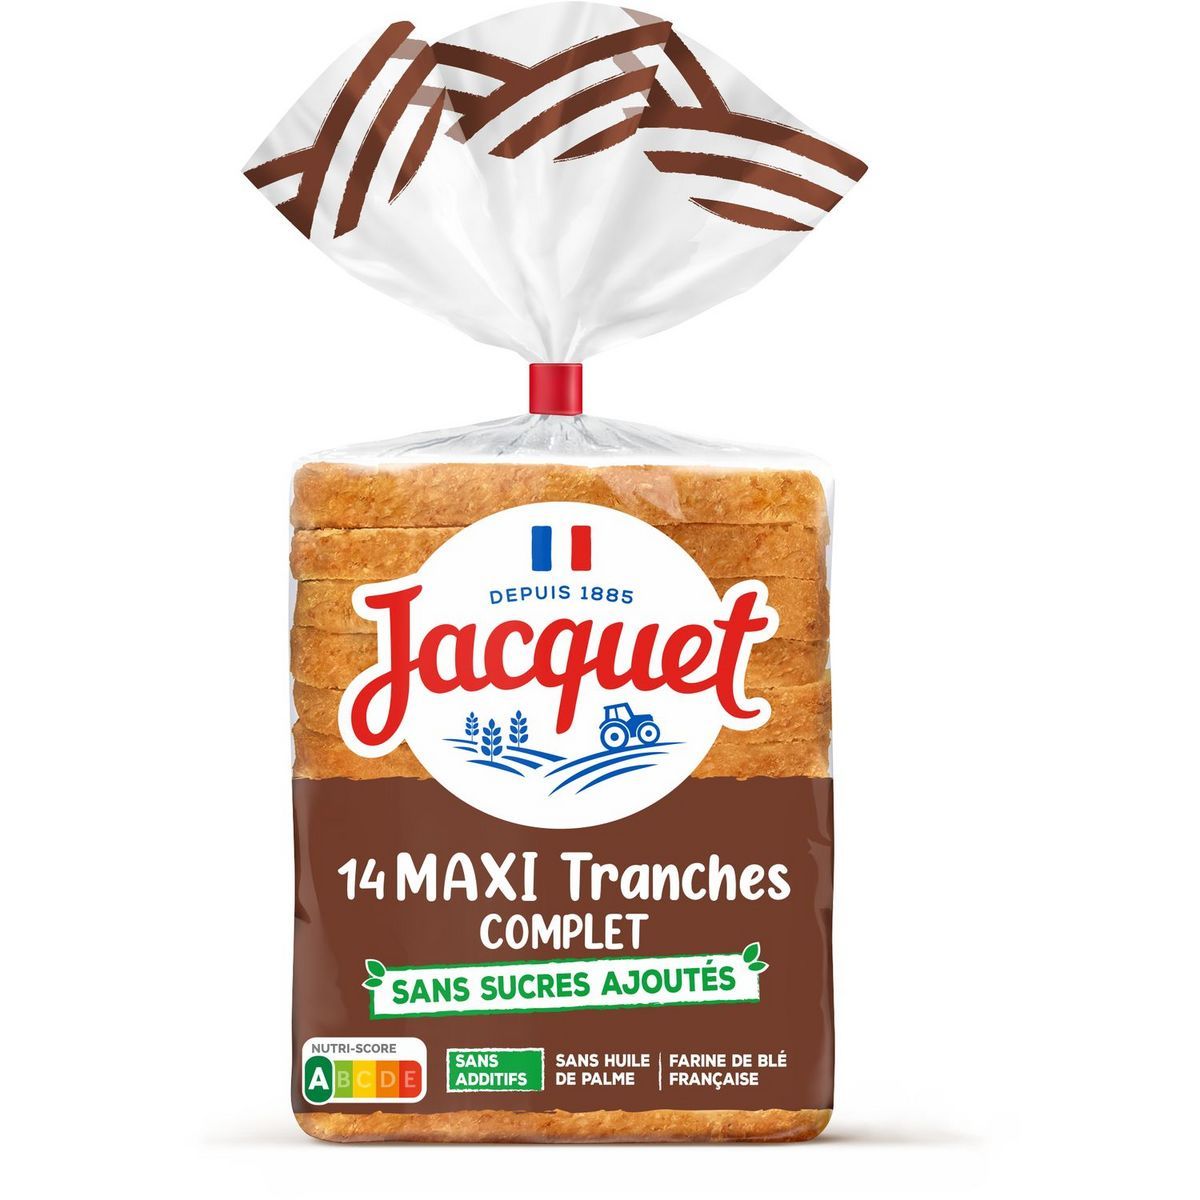 PAIN MIE MAXITRANCHES COMPLET JACQUET